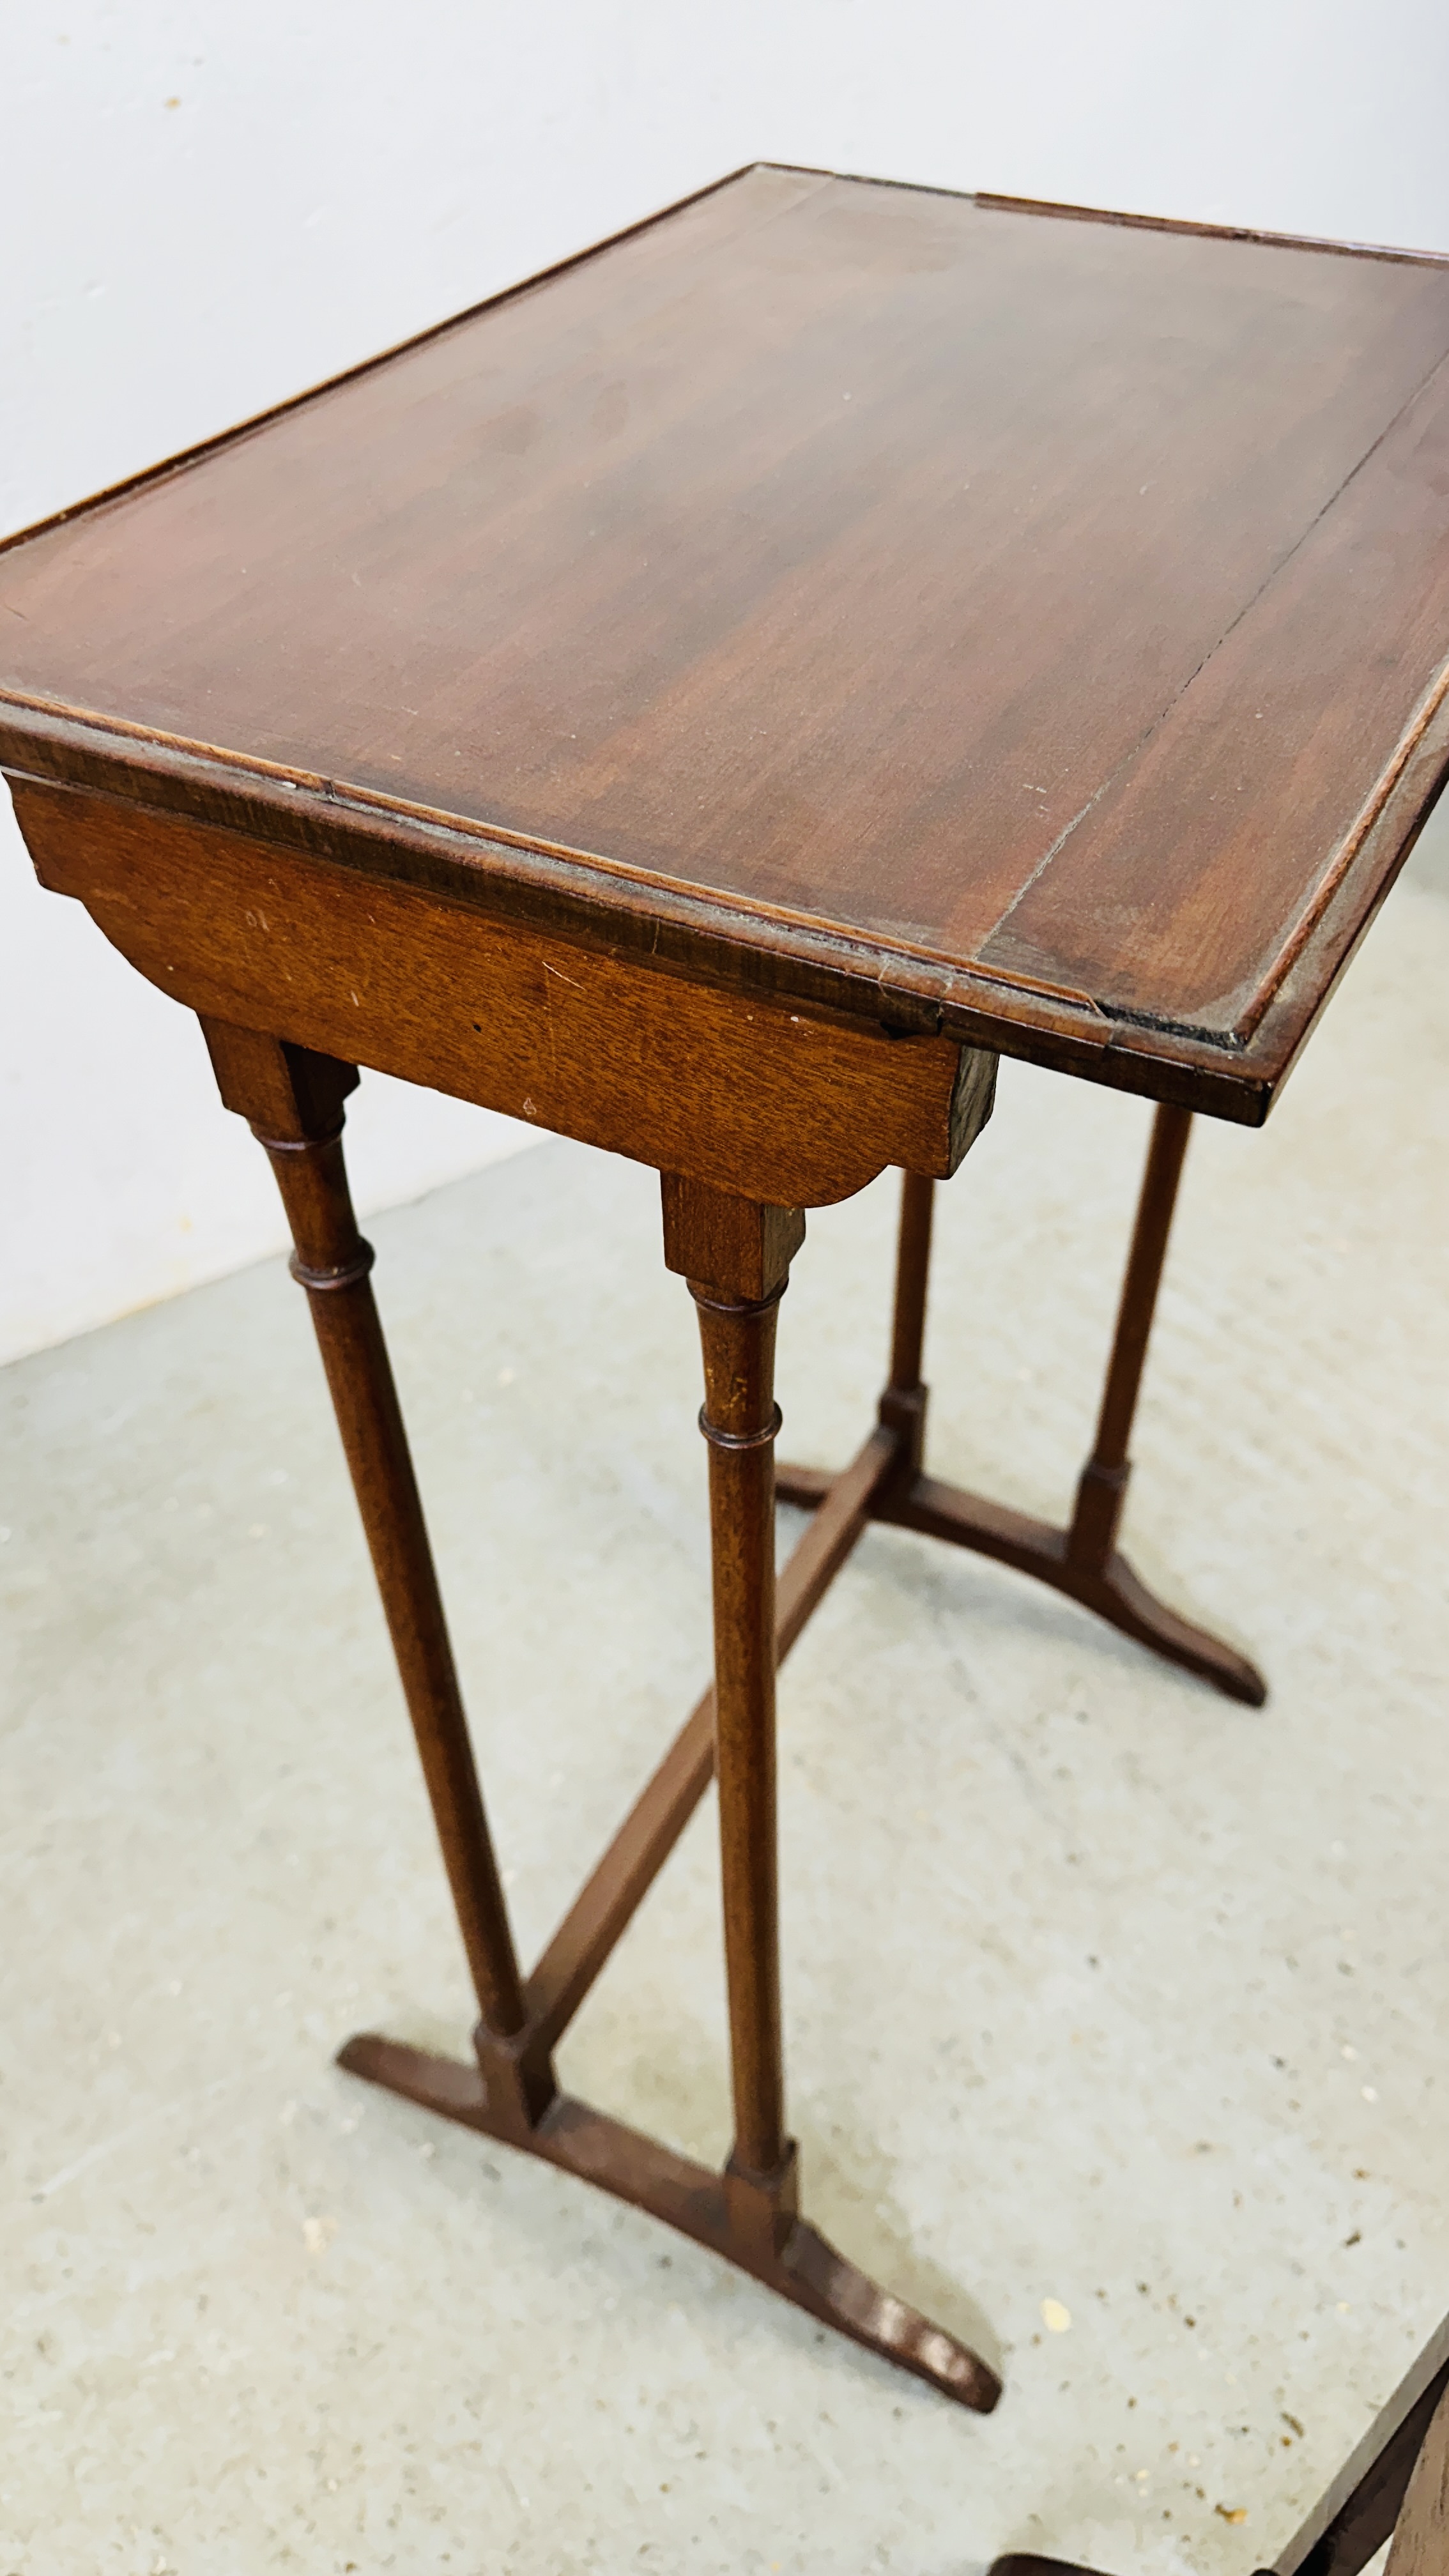 A FOLDING CAKE STAND ALONG WITH MAHOGNY OCCASIONAL TABLE, ONE OF A QUATTETO SET. - Image 10 of 10